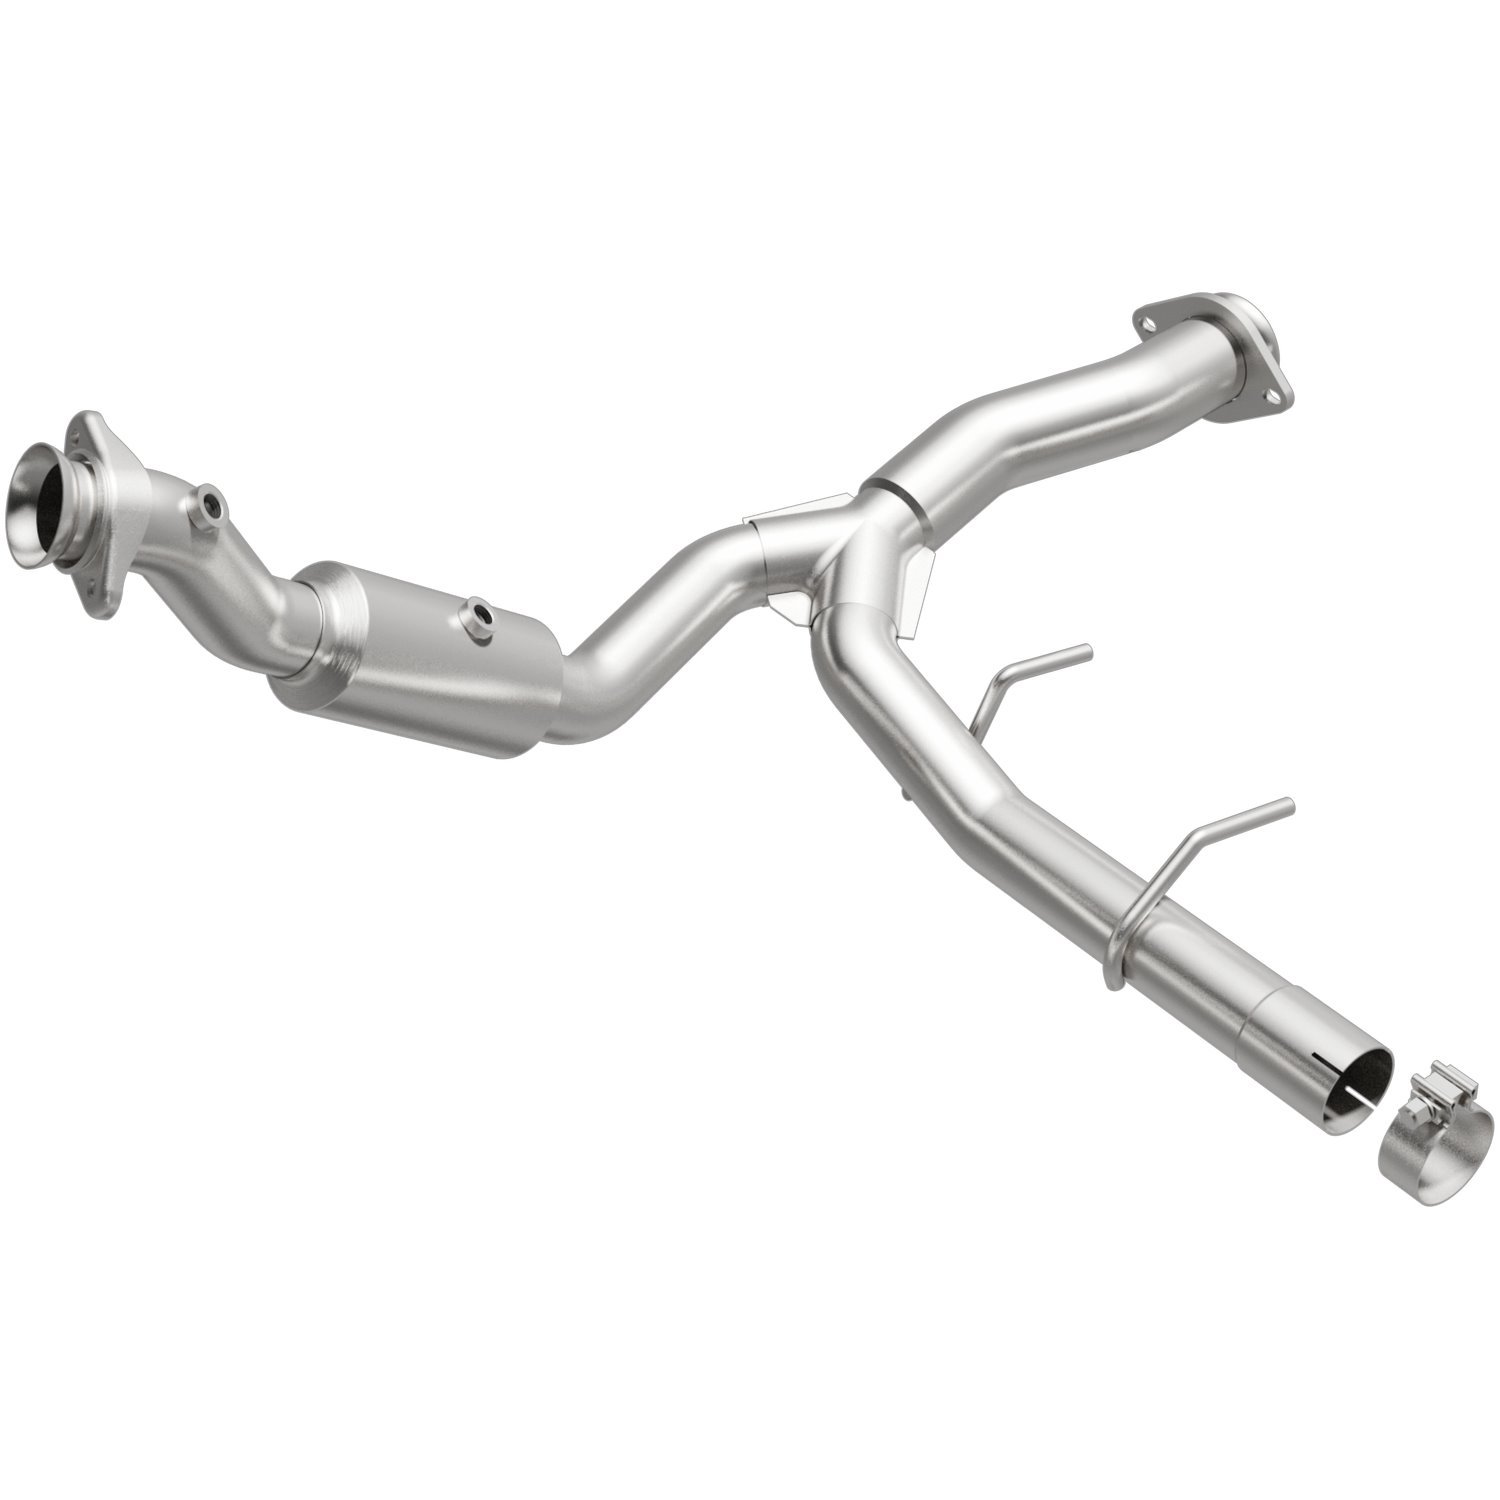 OEM Grade Federal / EPA Compliant Direct-Fit Catalytic Converter 21-528